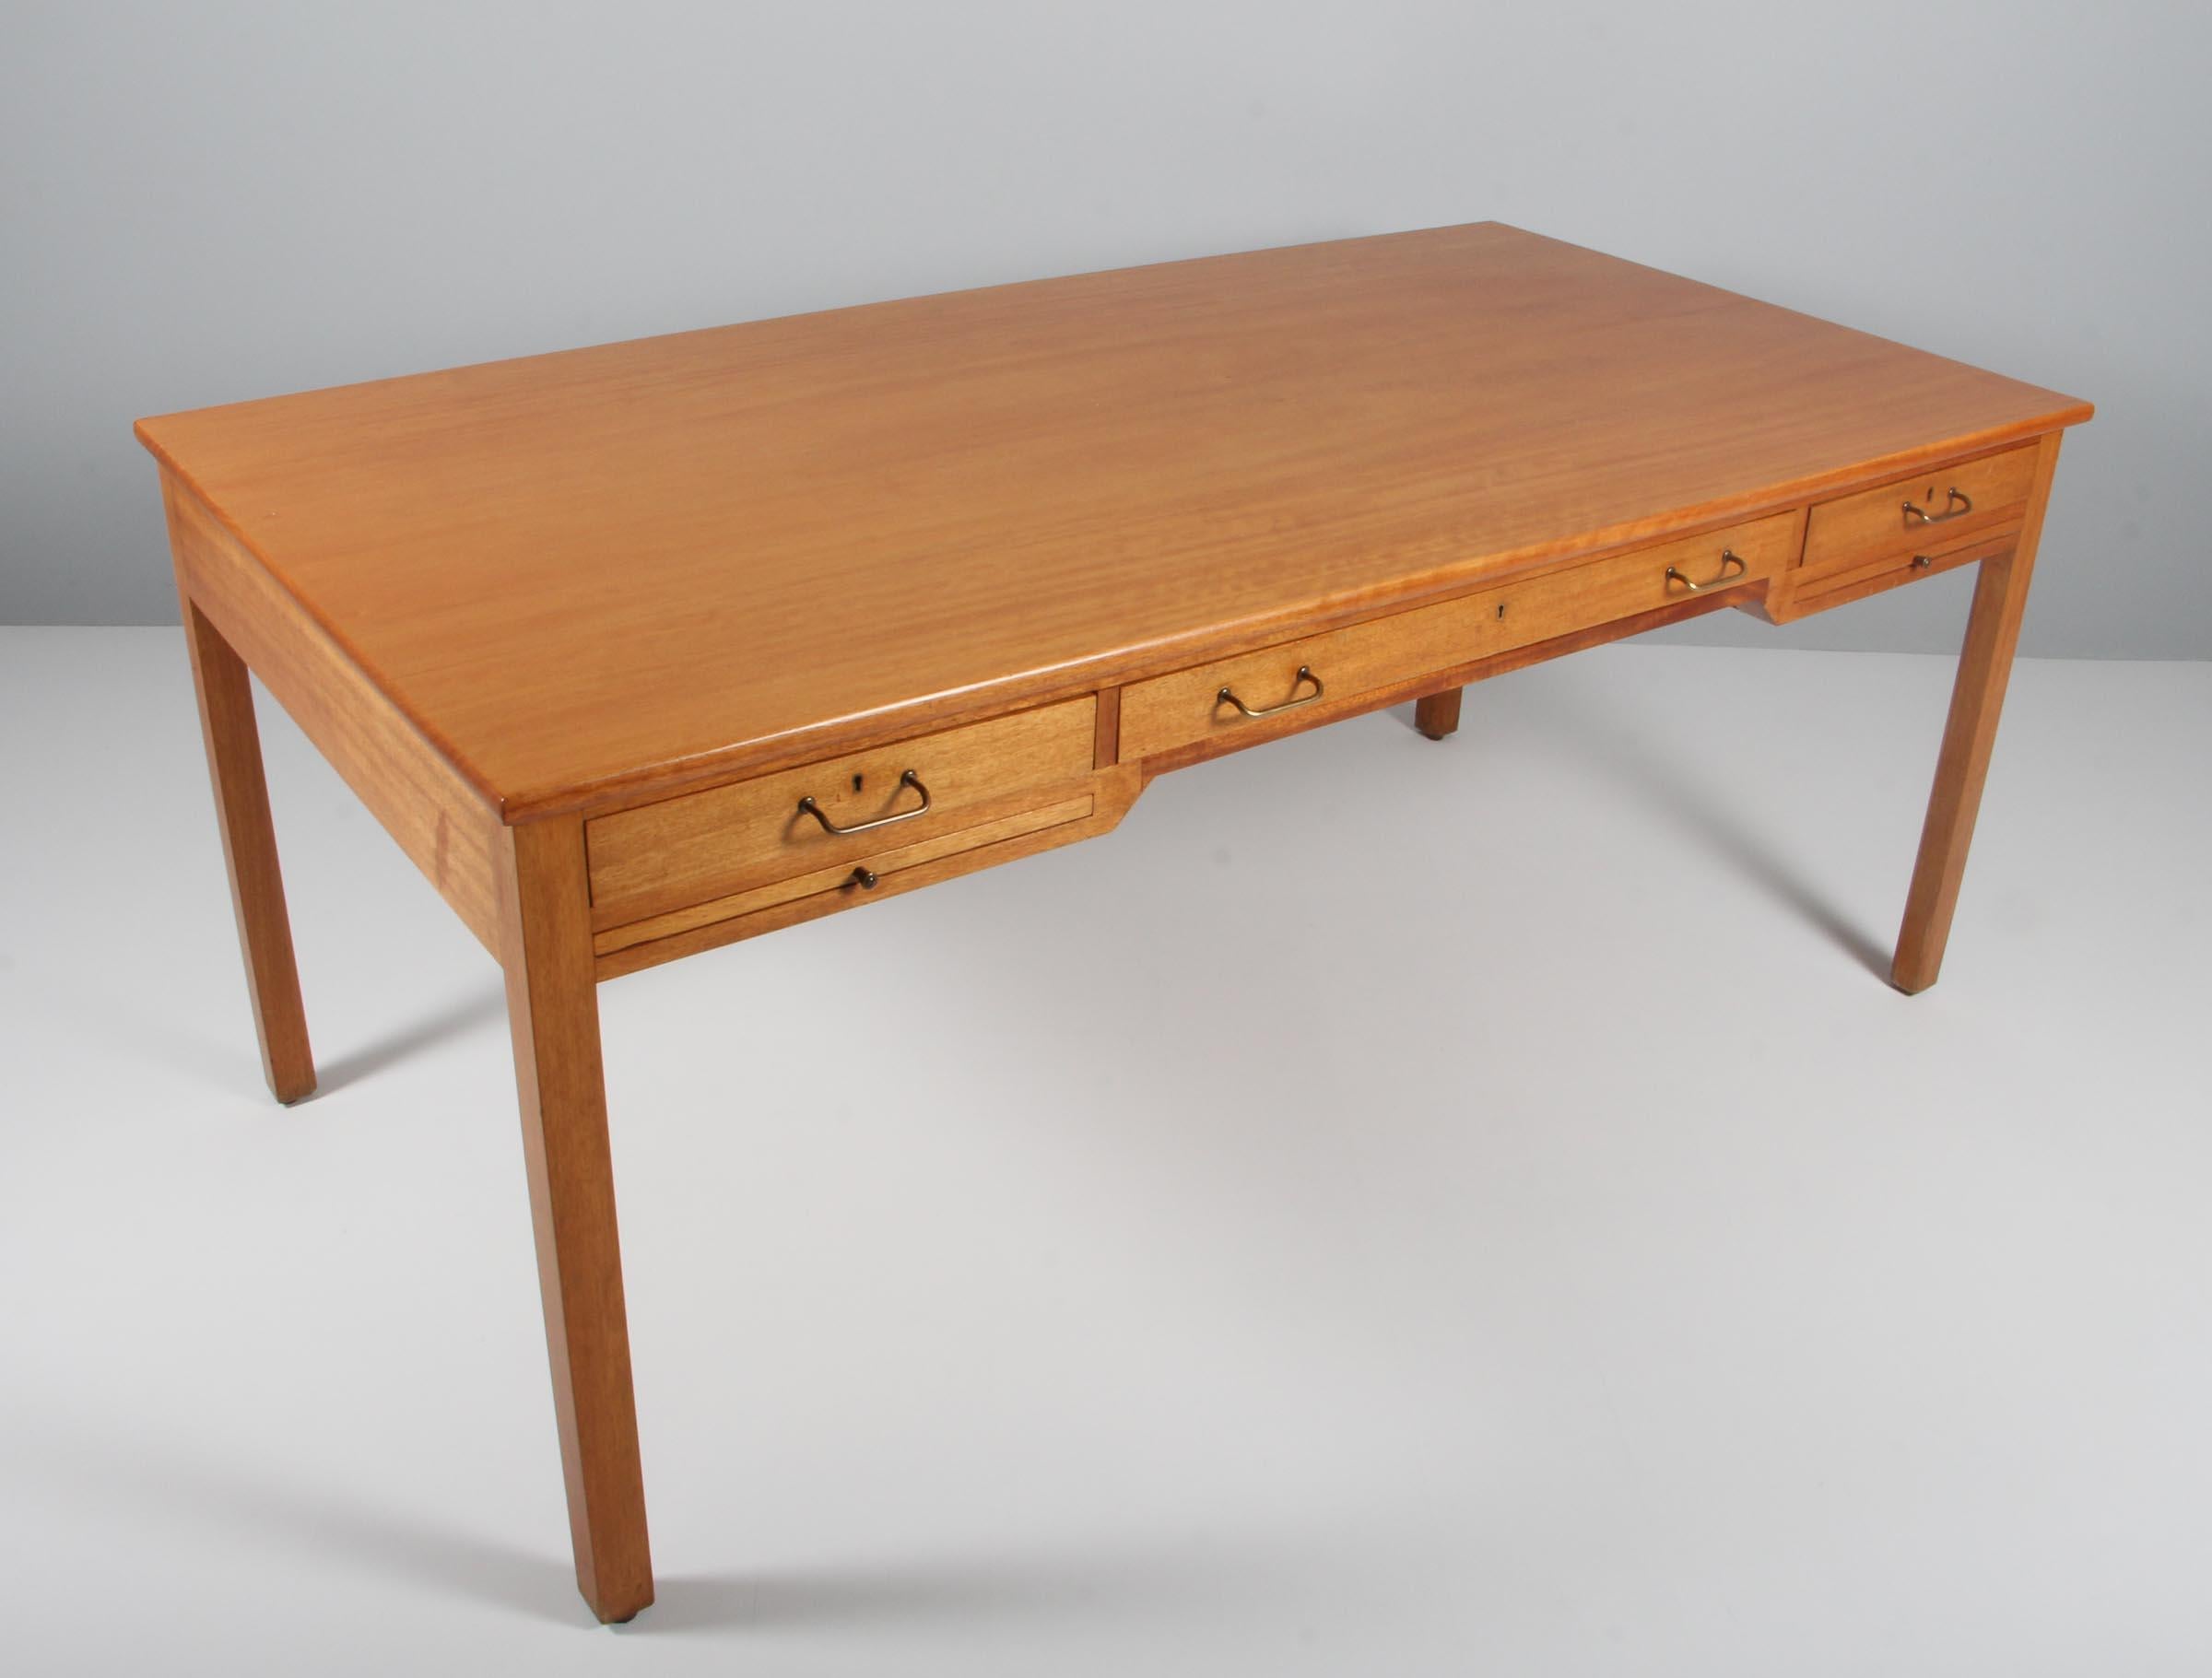 Desk made of solid cuban mahogany. 

Drawers and writing trays with brass details.

Made and marked by Rud Rasmussen. Marked from Copenhagen town hall.